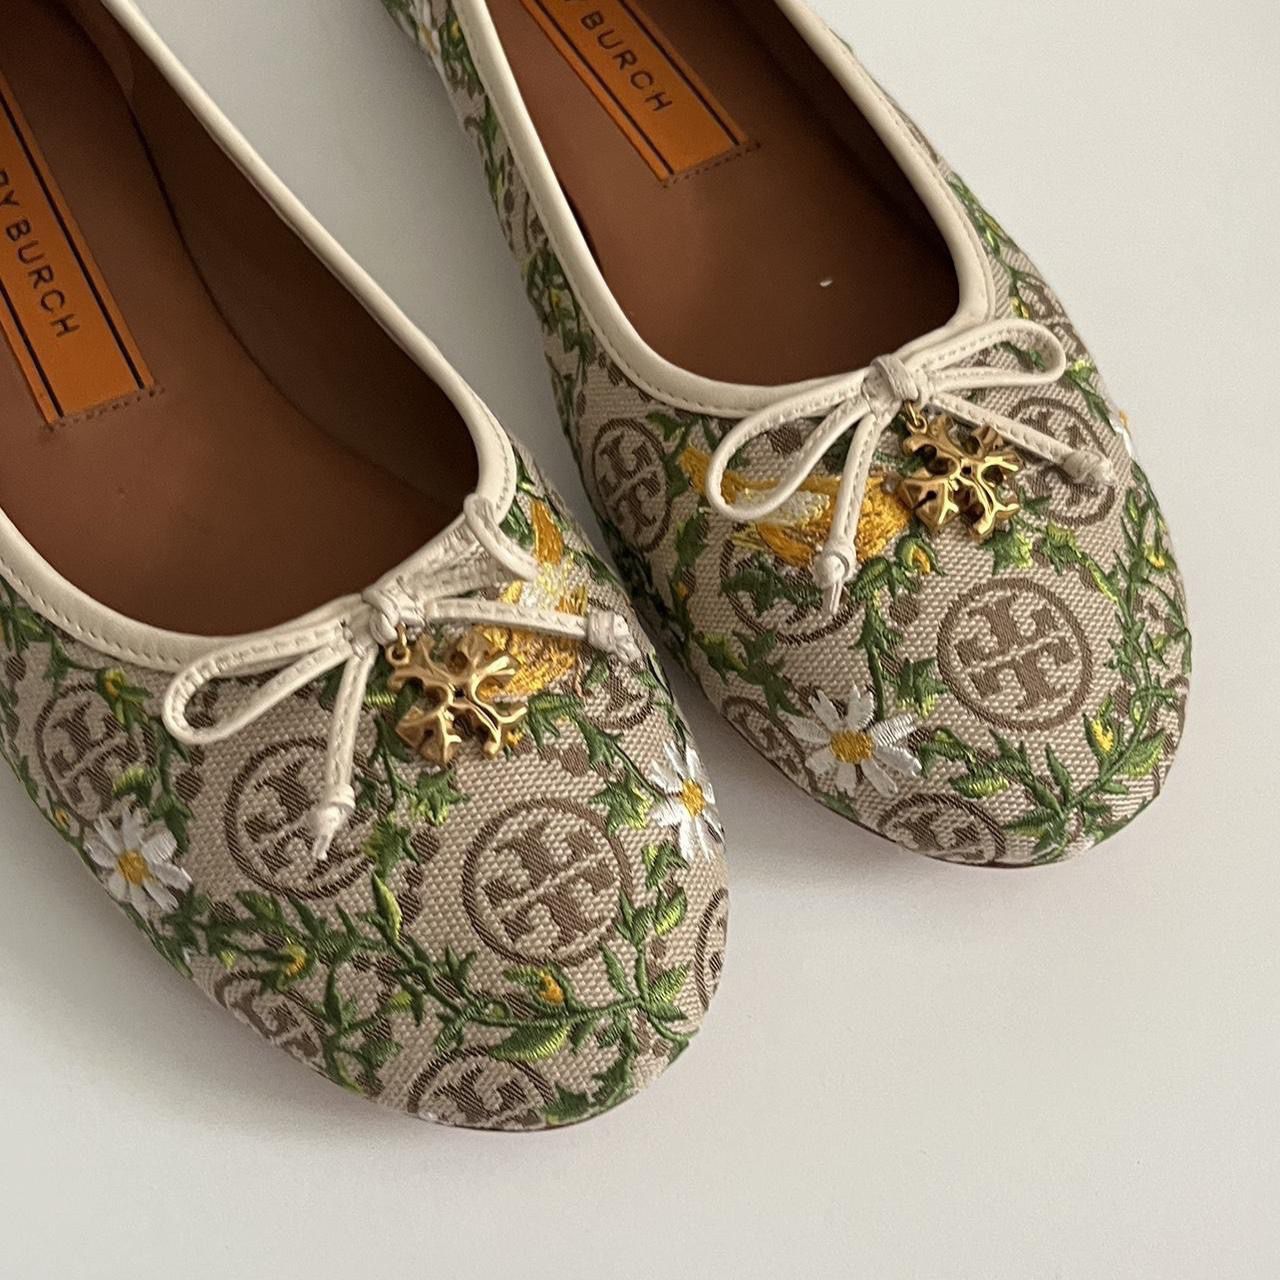 Tory Burch Ballerina Shoes for Sale in Chicago, IL - OfferUp